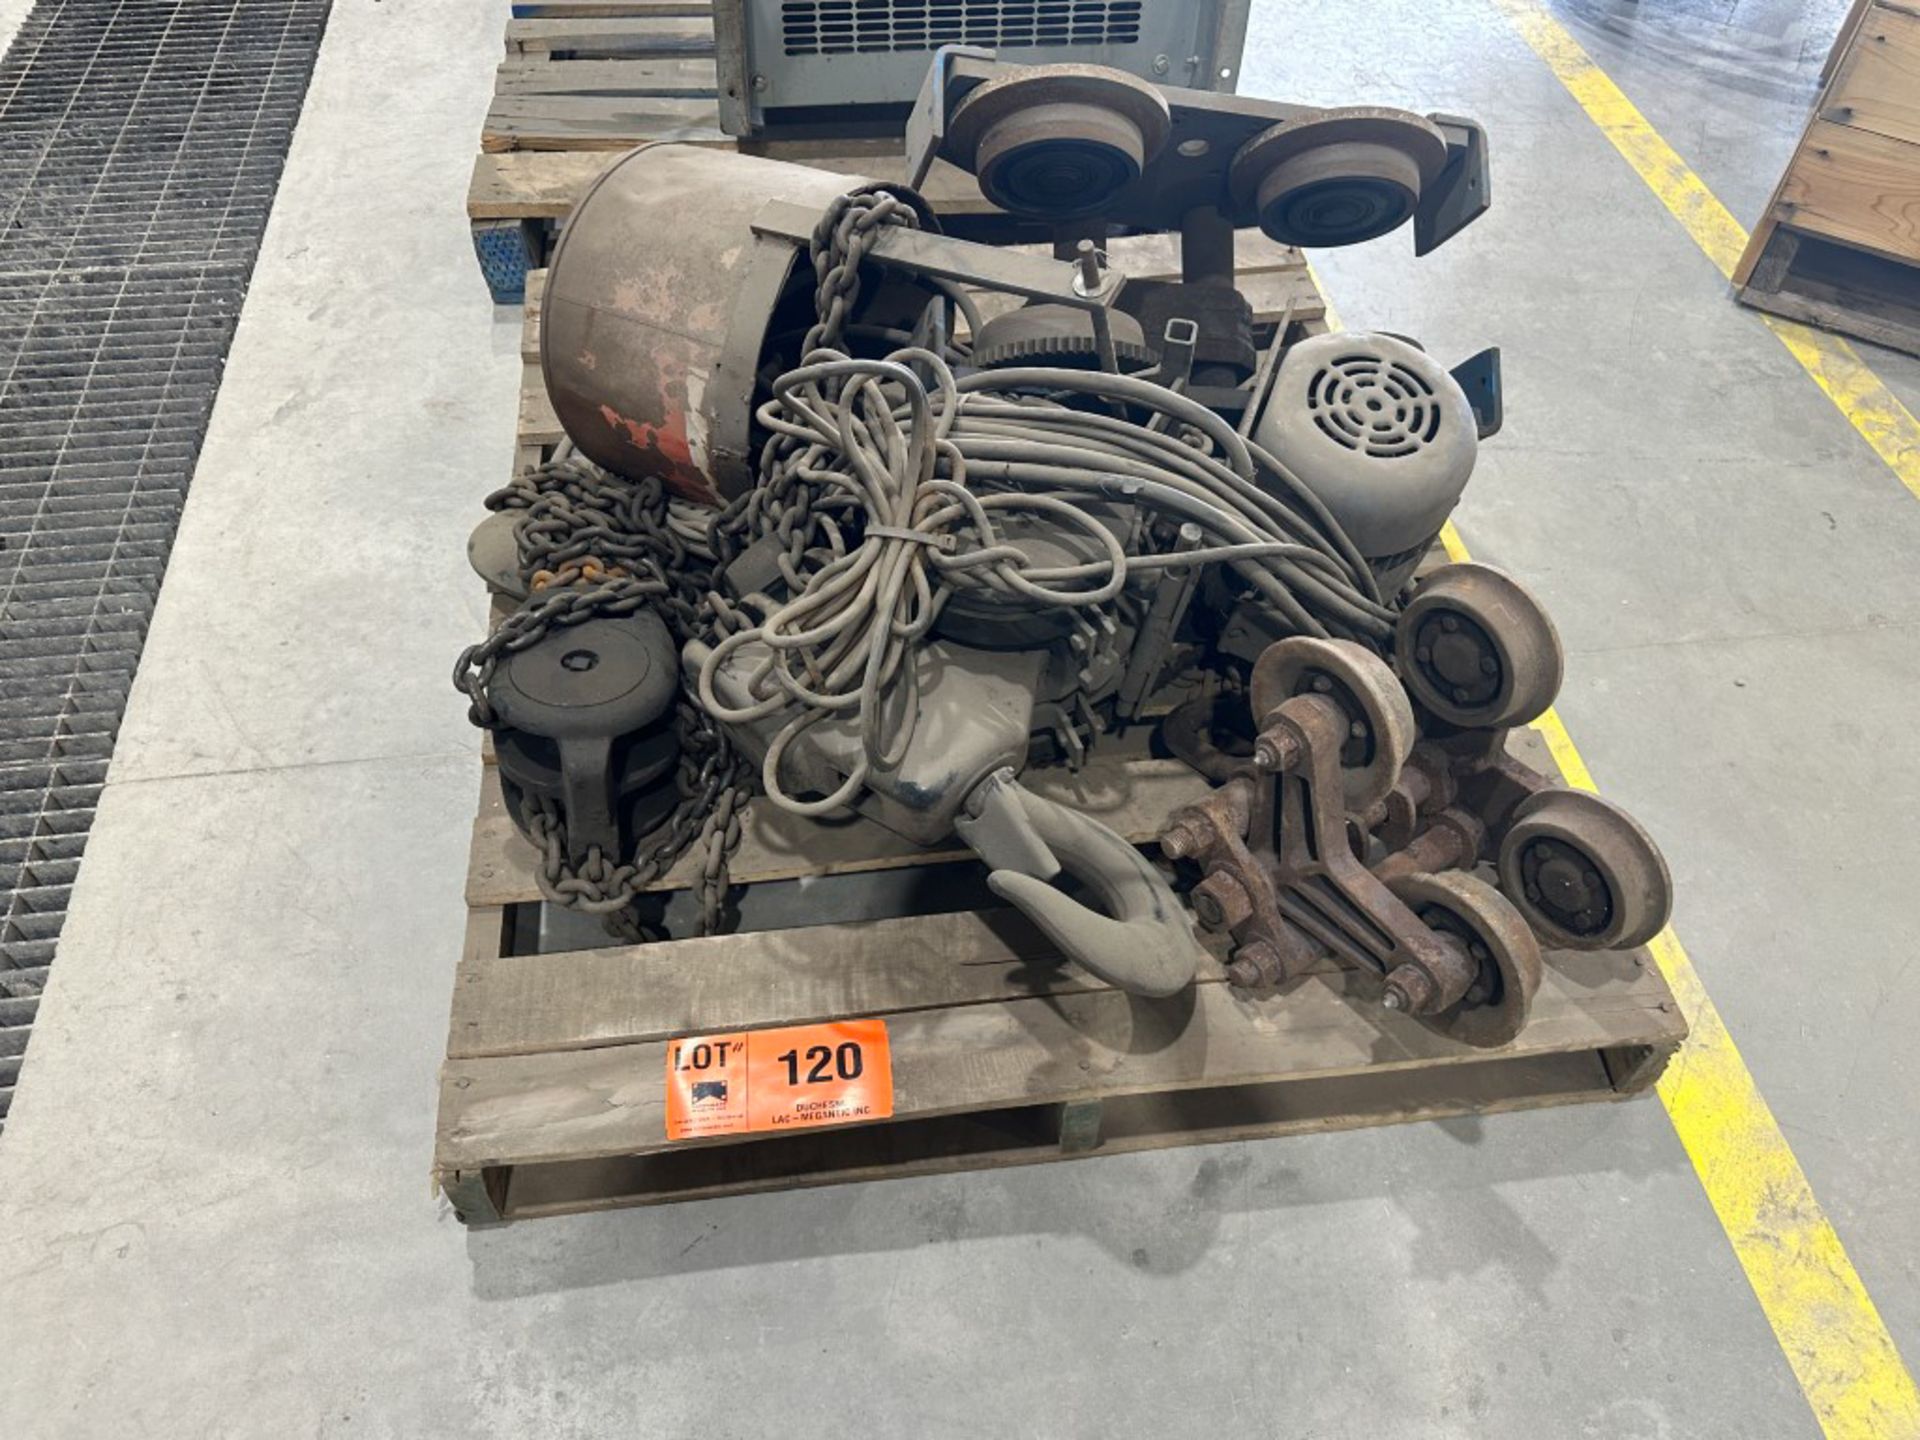 LOT/ skid and contents - chain hoist and trolley